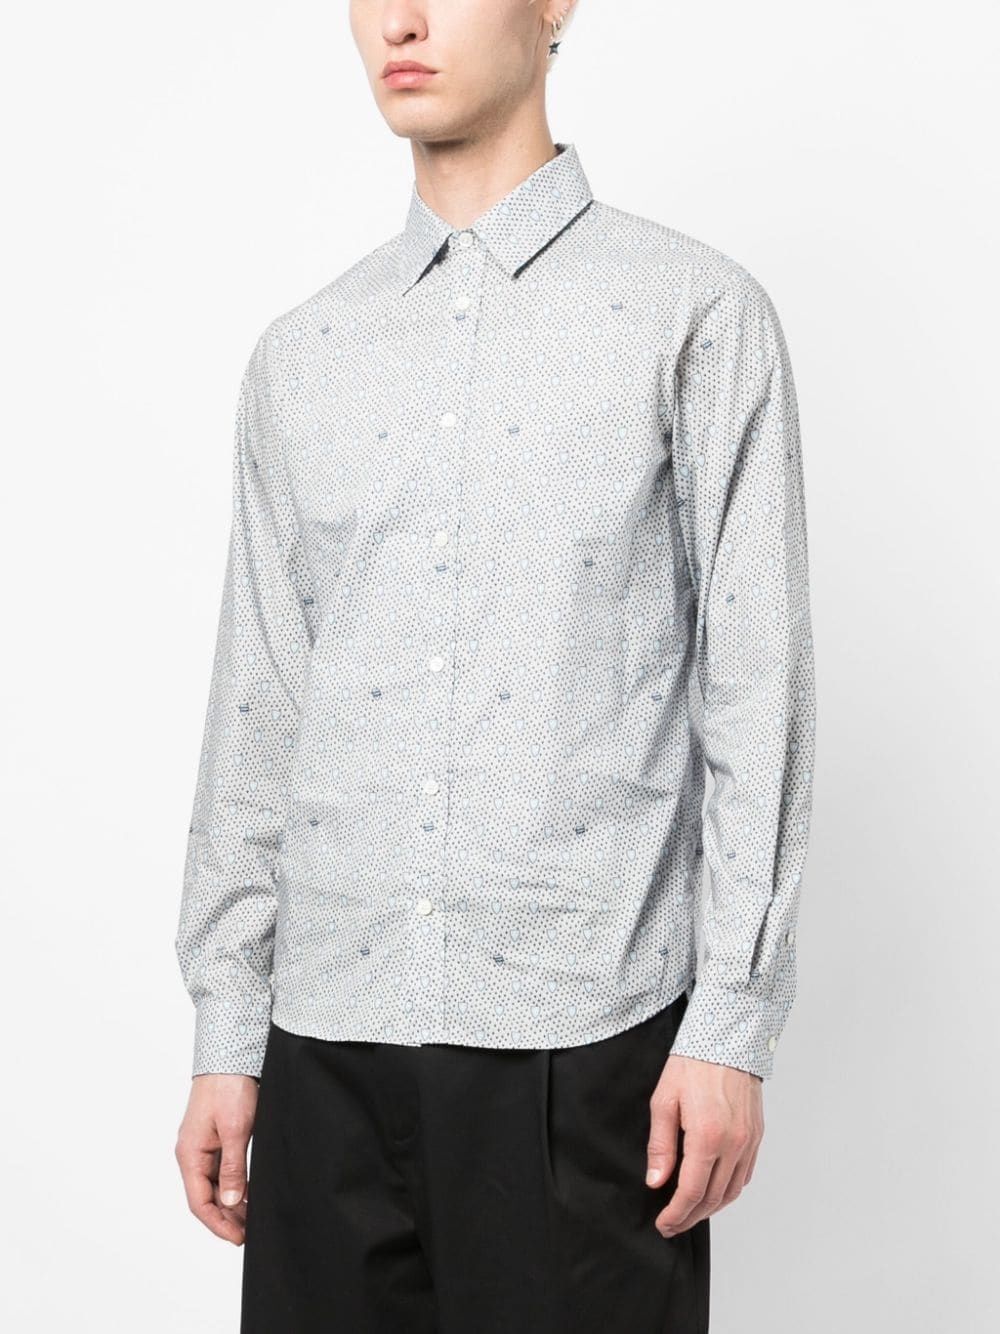 CLASSIC SHIRT IN SHIELD PRINTED COTTON - 5